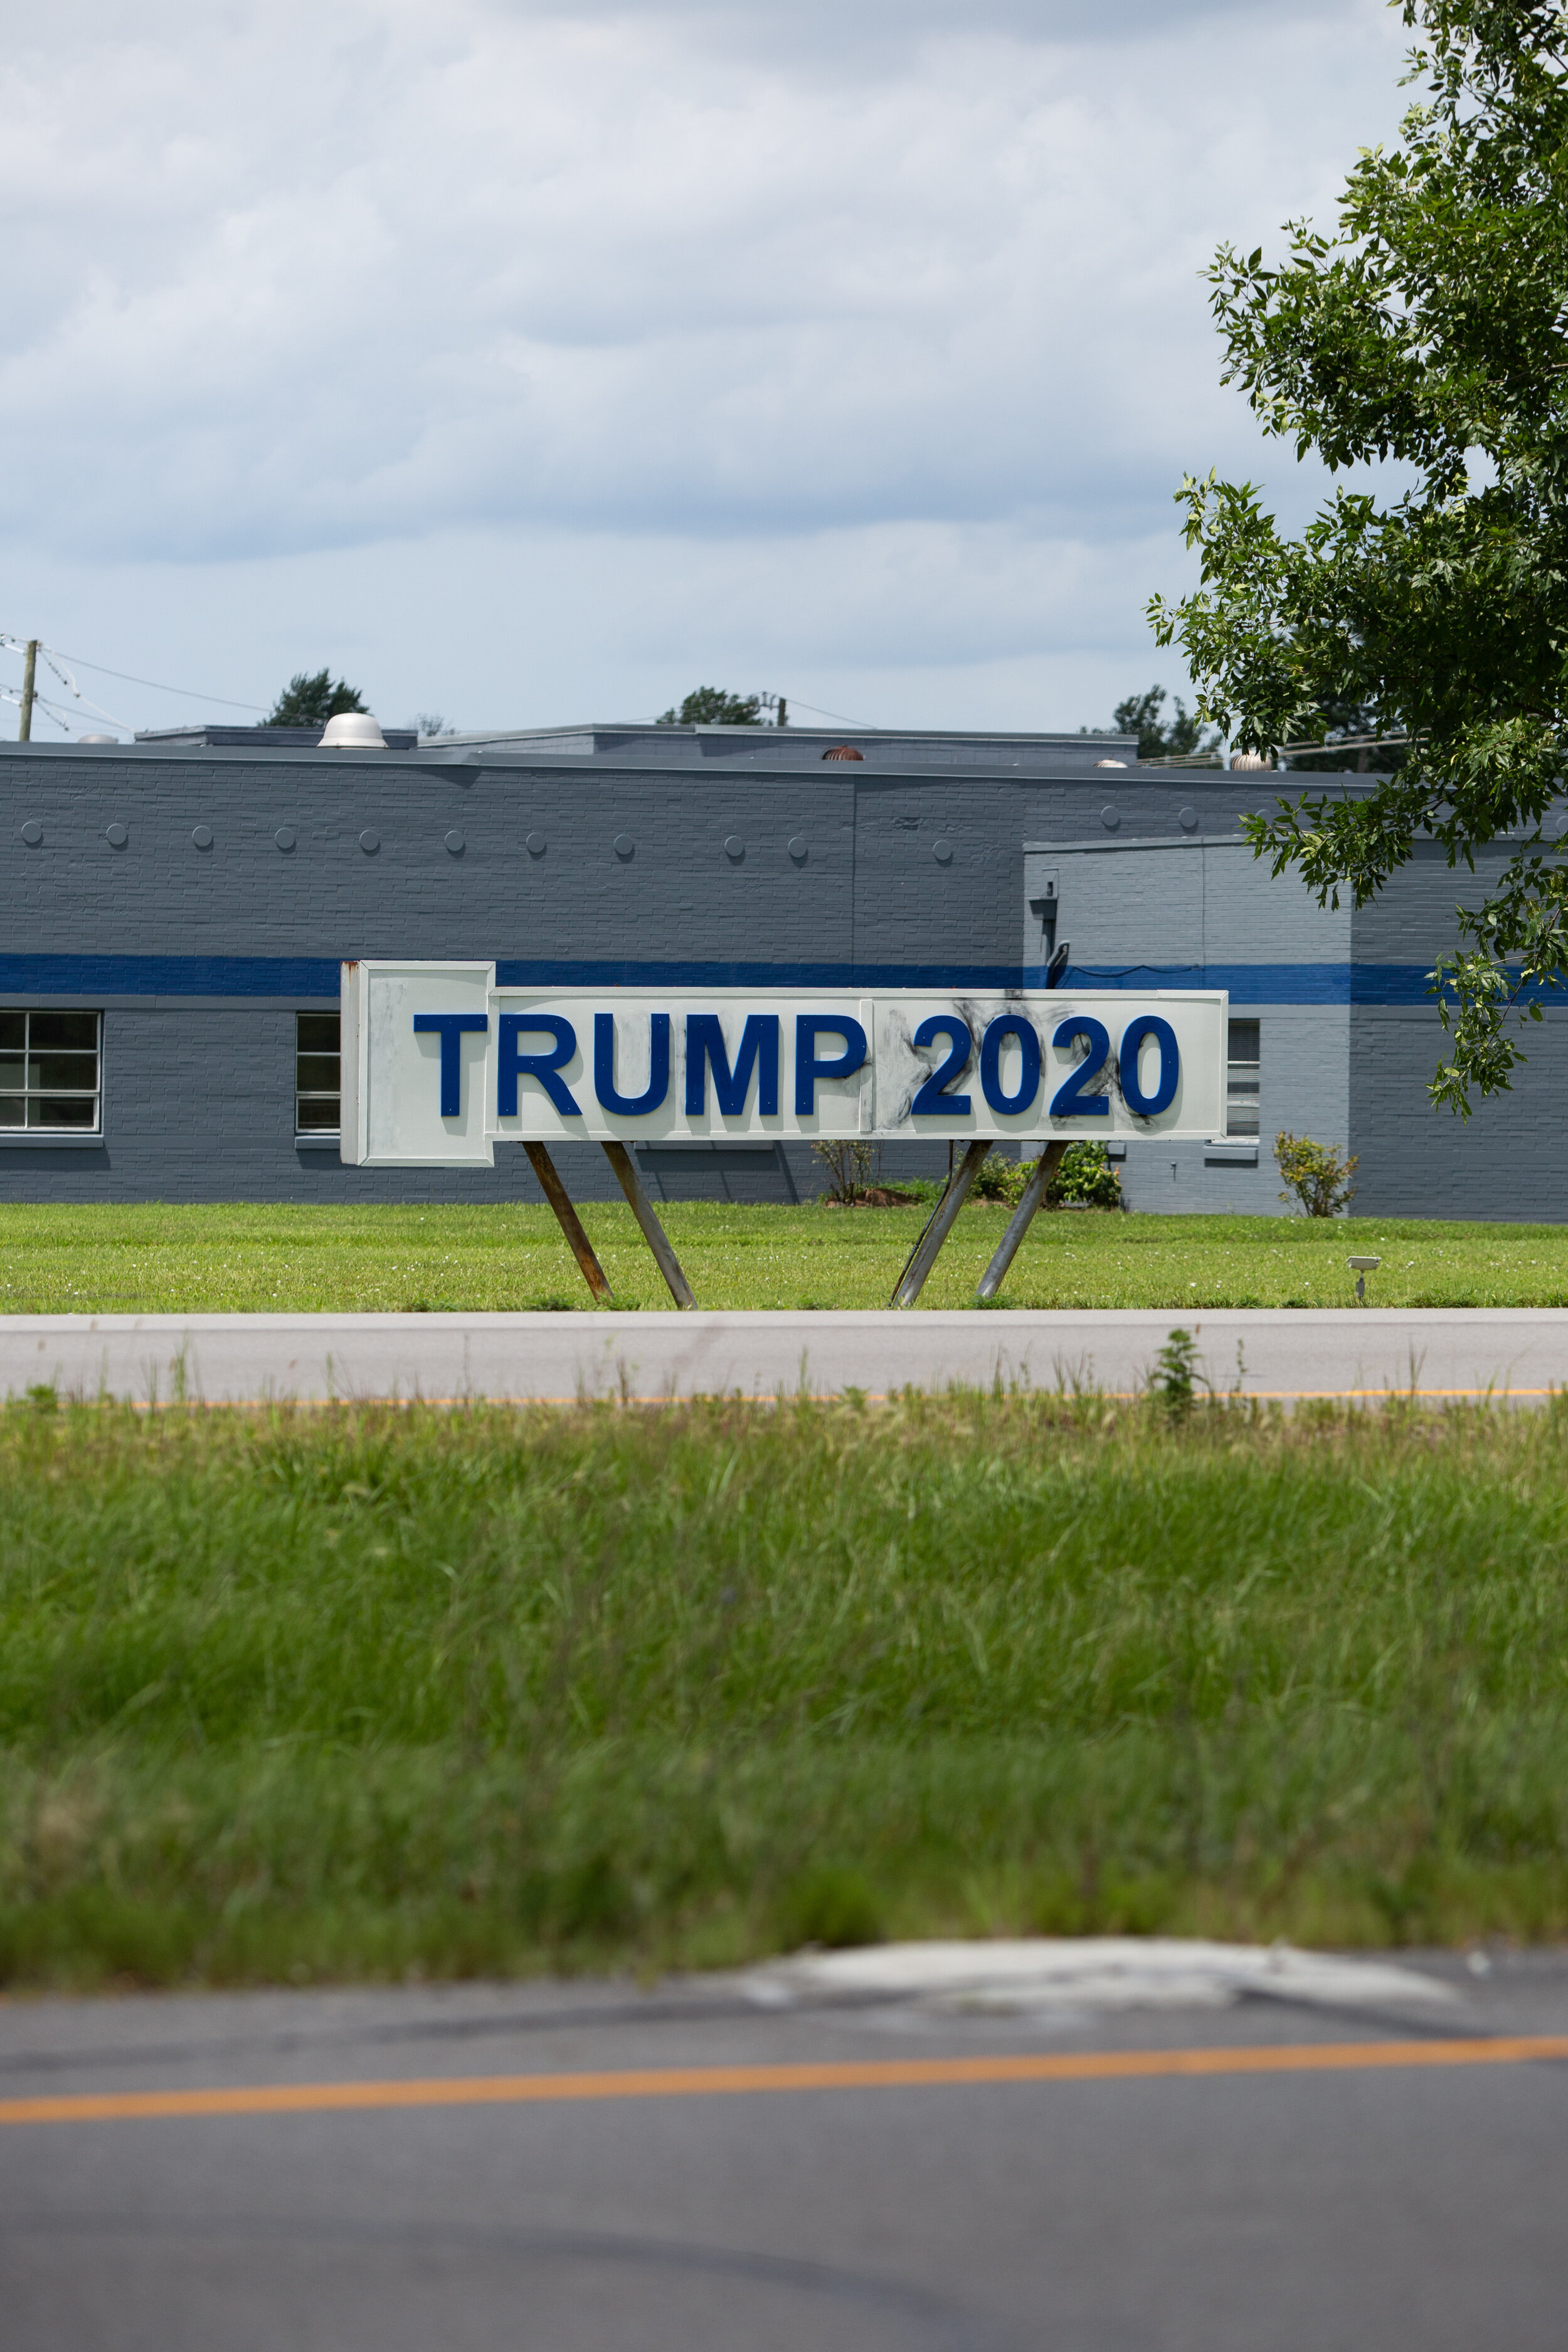 A custom “Trump 2020” sign on the side of the road